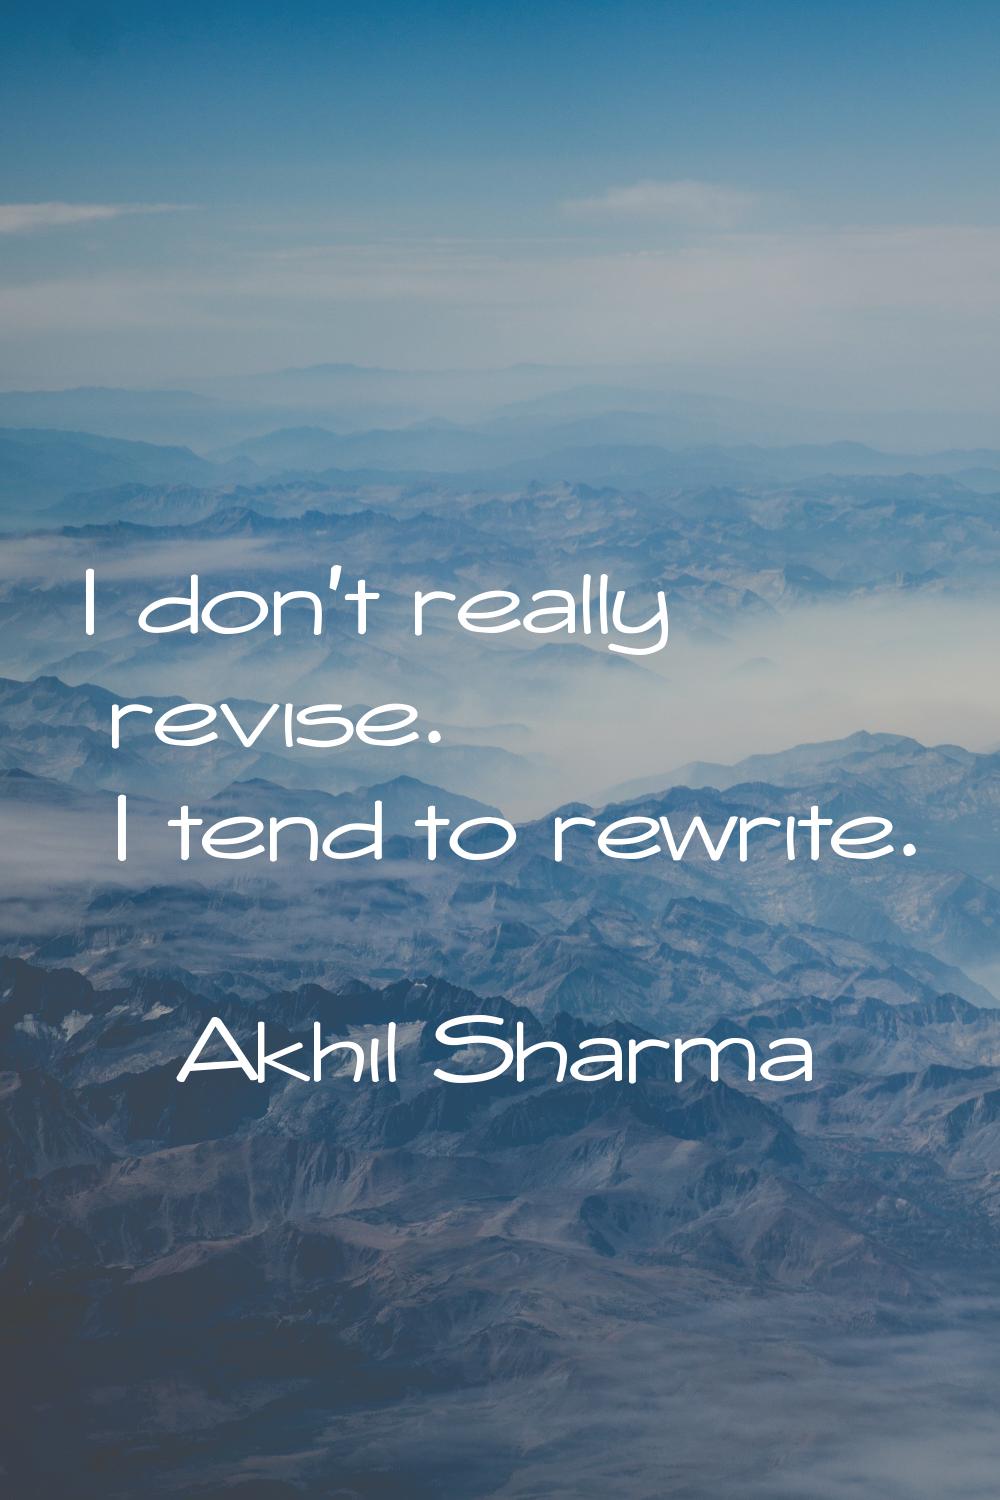 I don't really revise. I tend to rewrite.